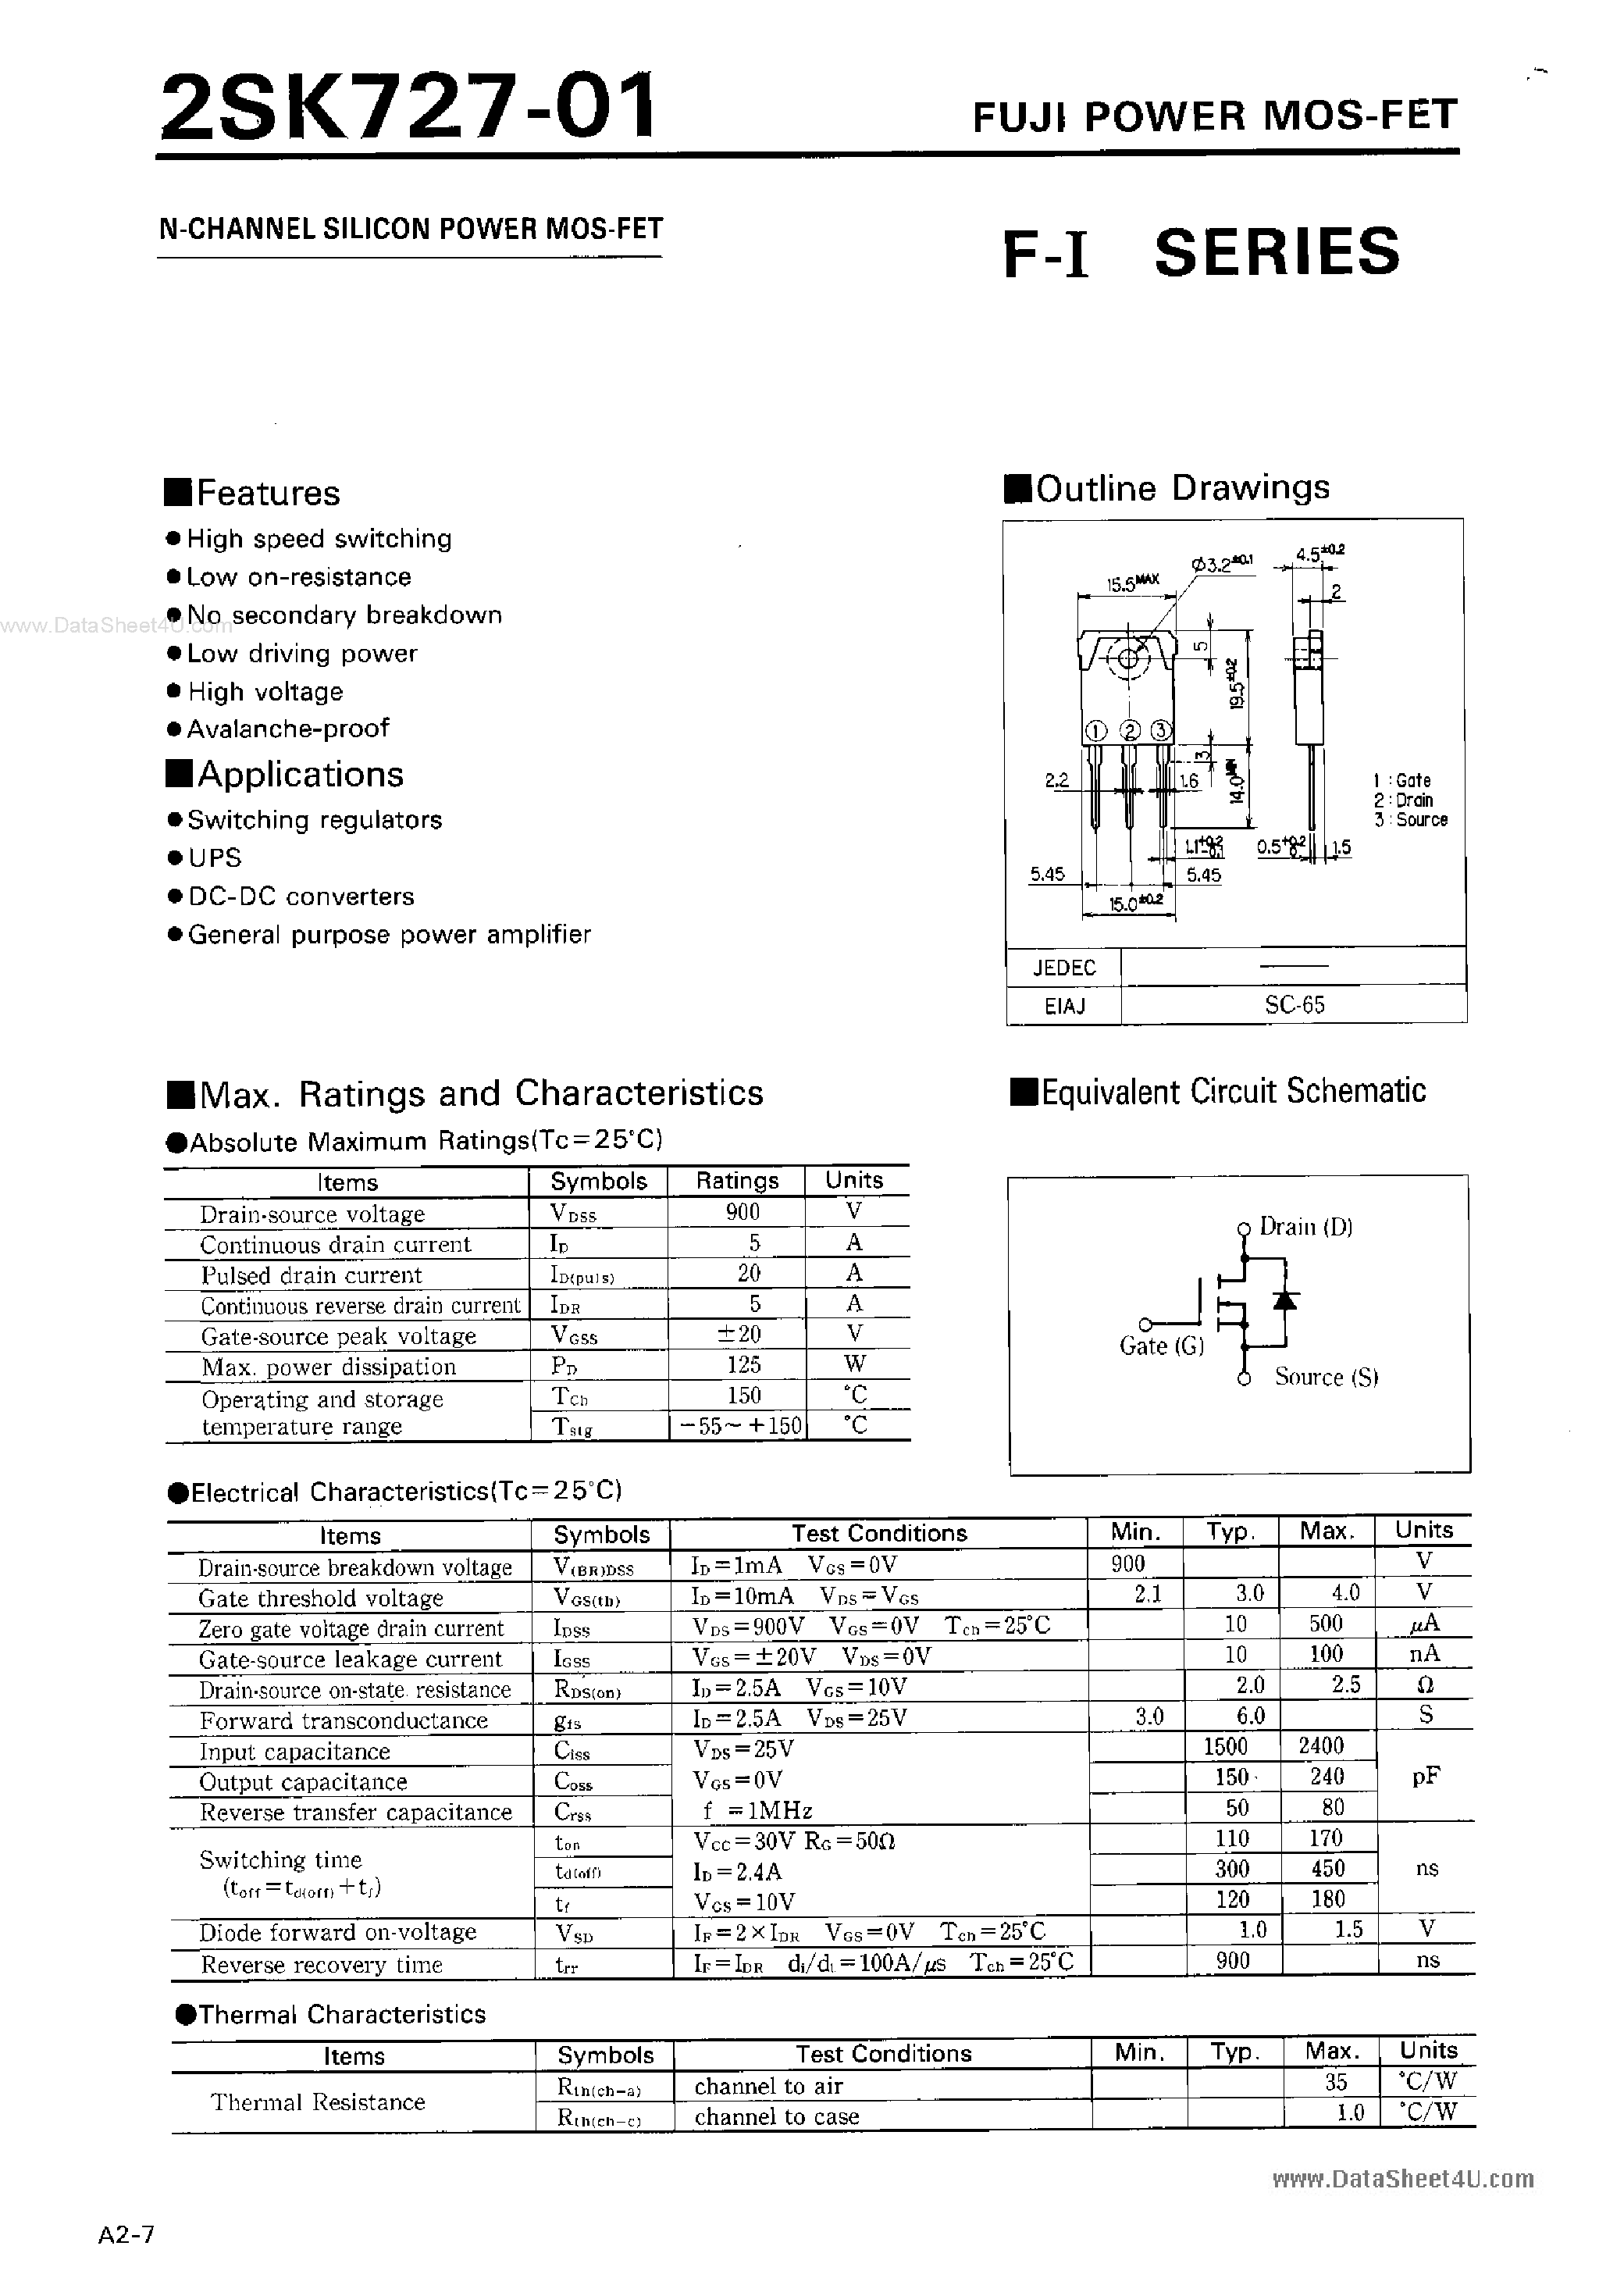 Datasheet K727-01 - Search -----> 2SK727-01 page 1